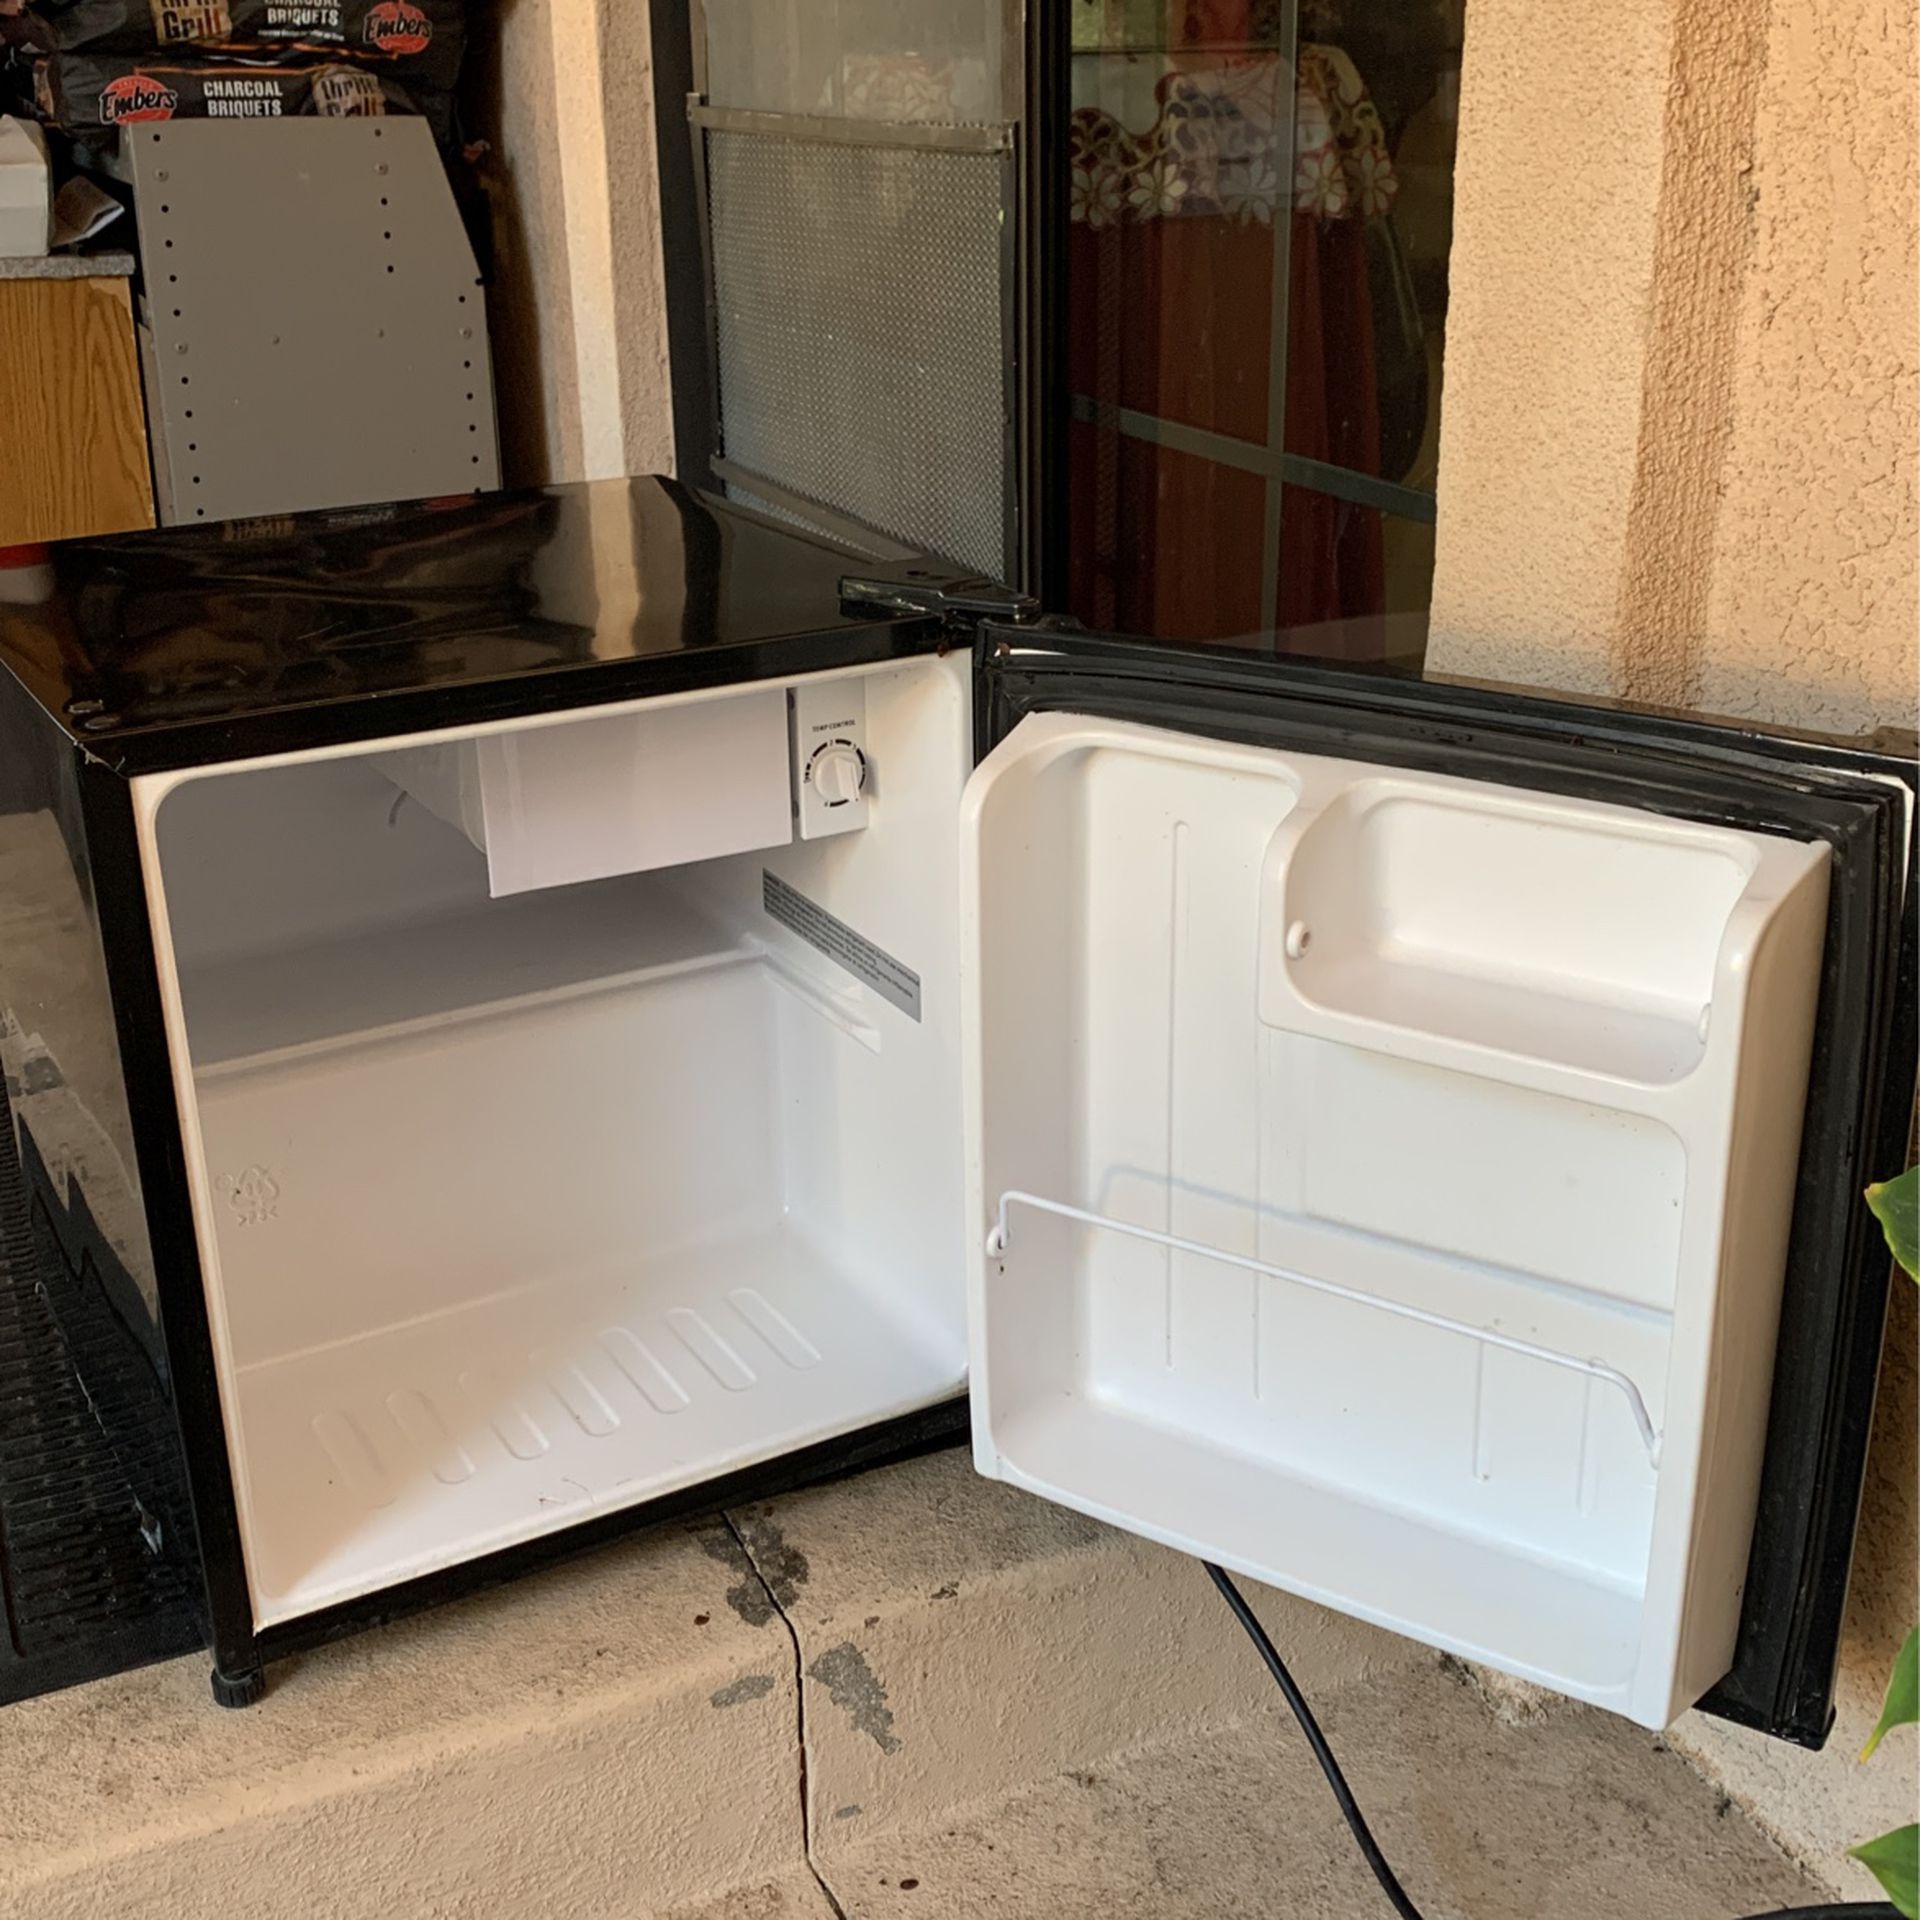 Mini Refrigerator with Freezer, Used, Grt Cond, Pick Up Only, Long Beach,  CA